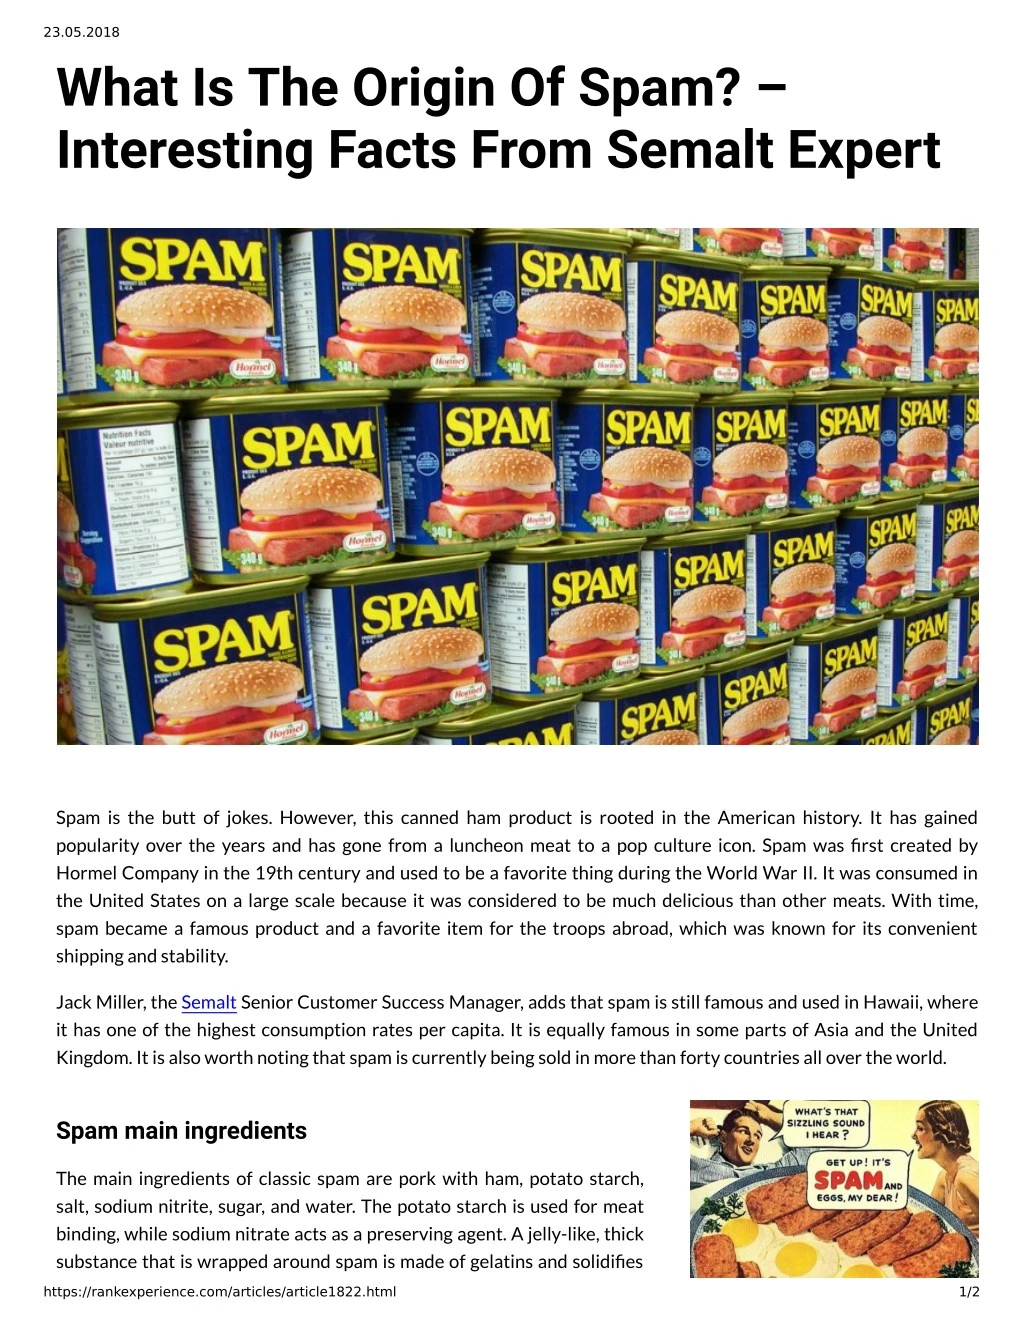 23 05 2018 what is the origin of spam interesting